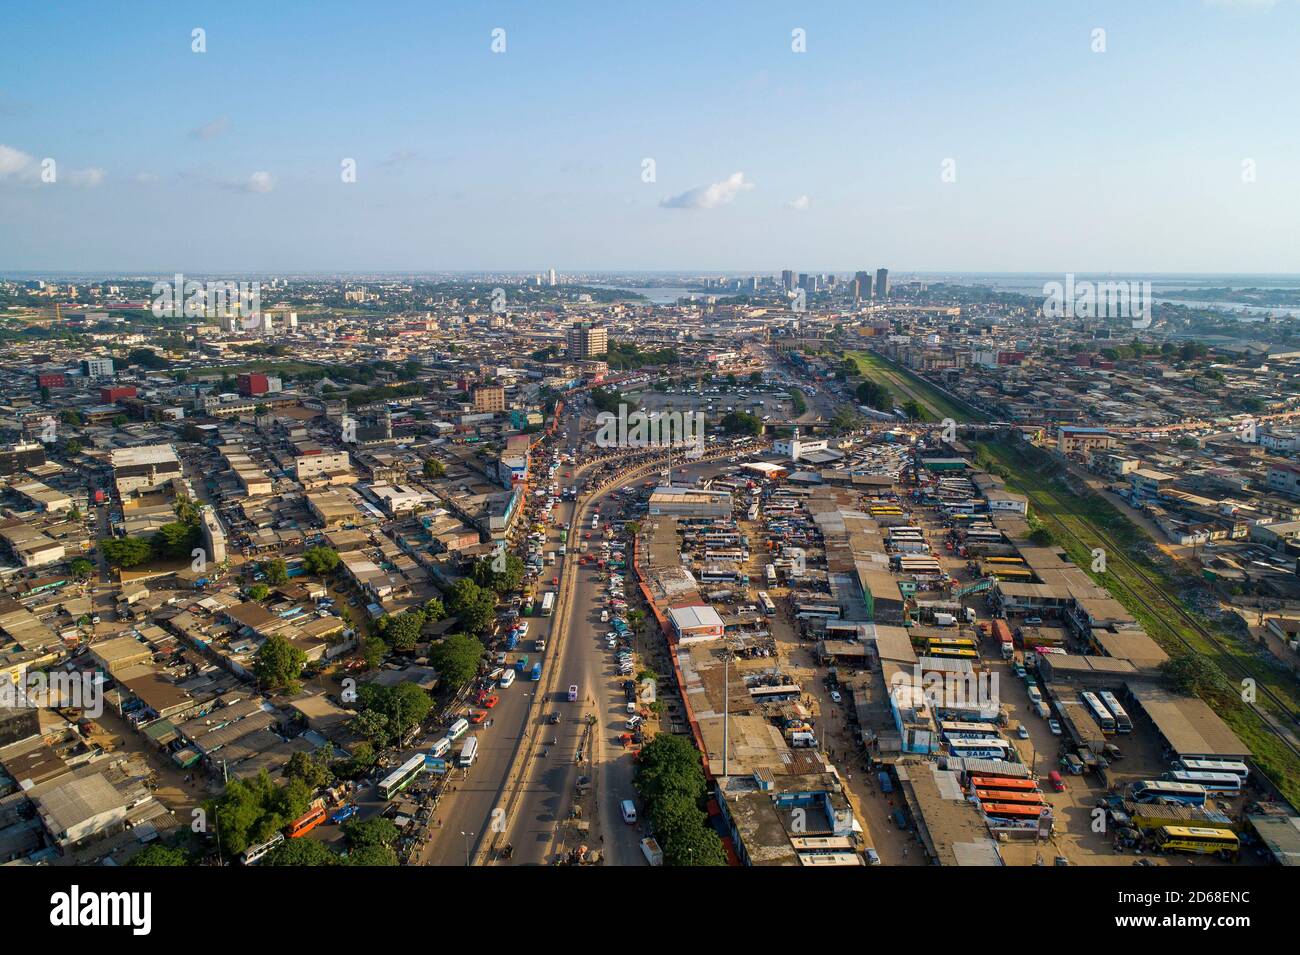 Cote d'Ivoire (Ivory Coast), Abidjan: aerial view of the new popular district of Adjame, north of the city. The bus station and the town in the backgr Stock Photo